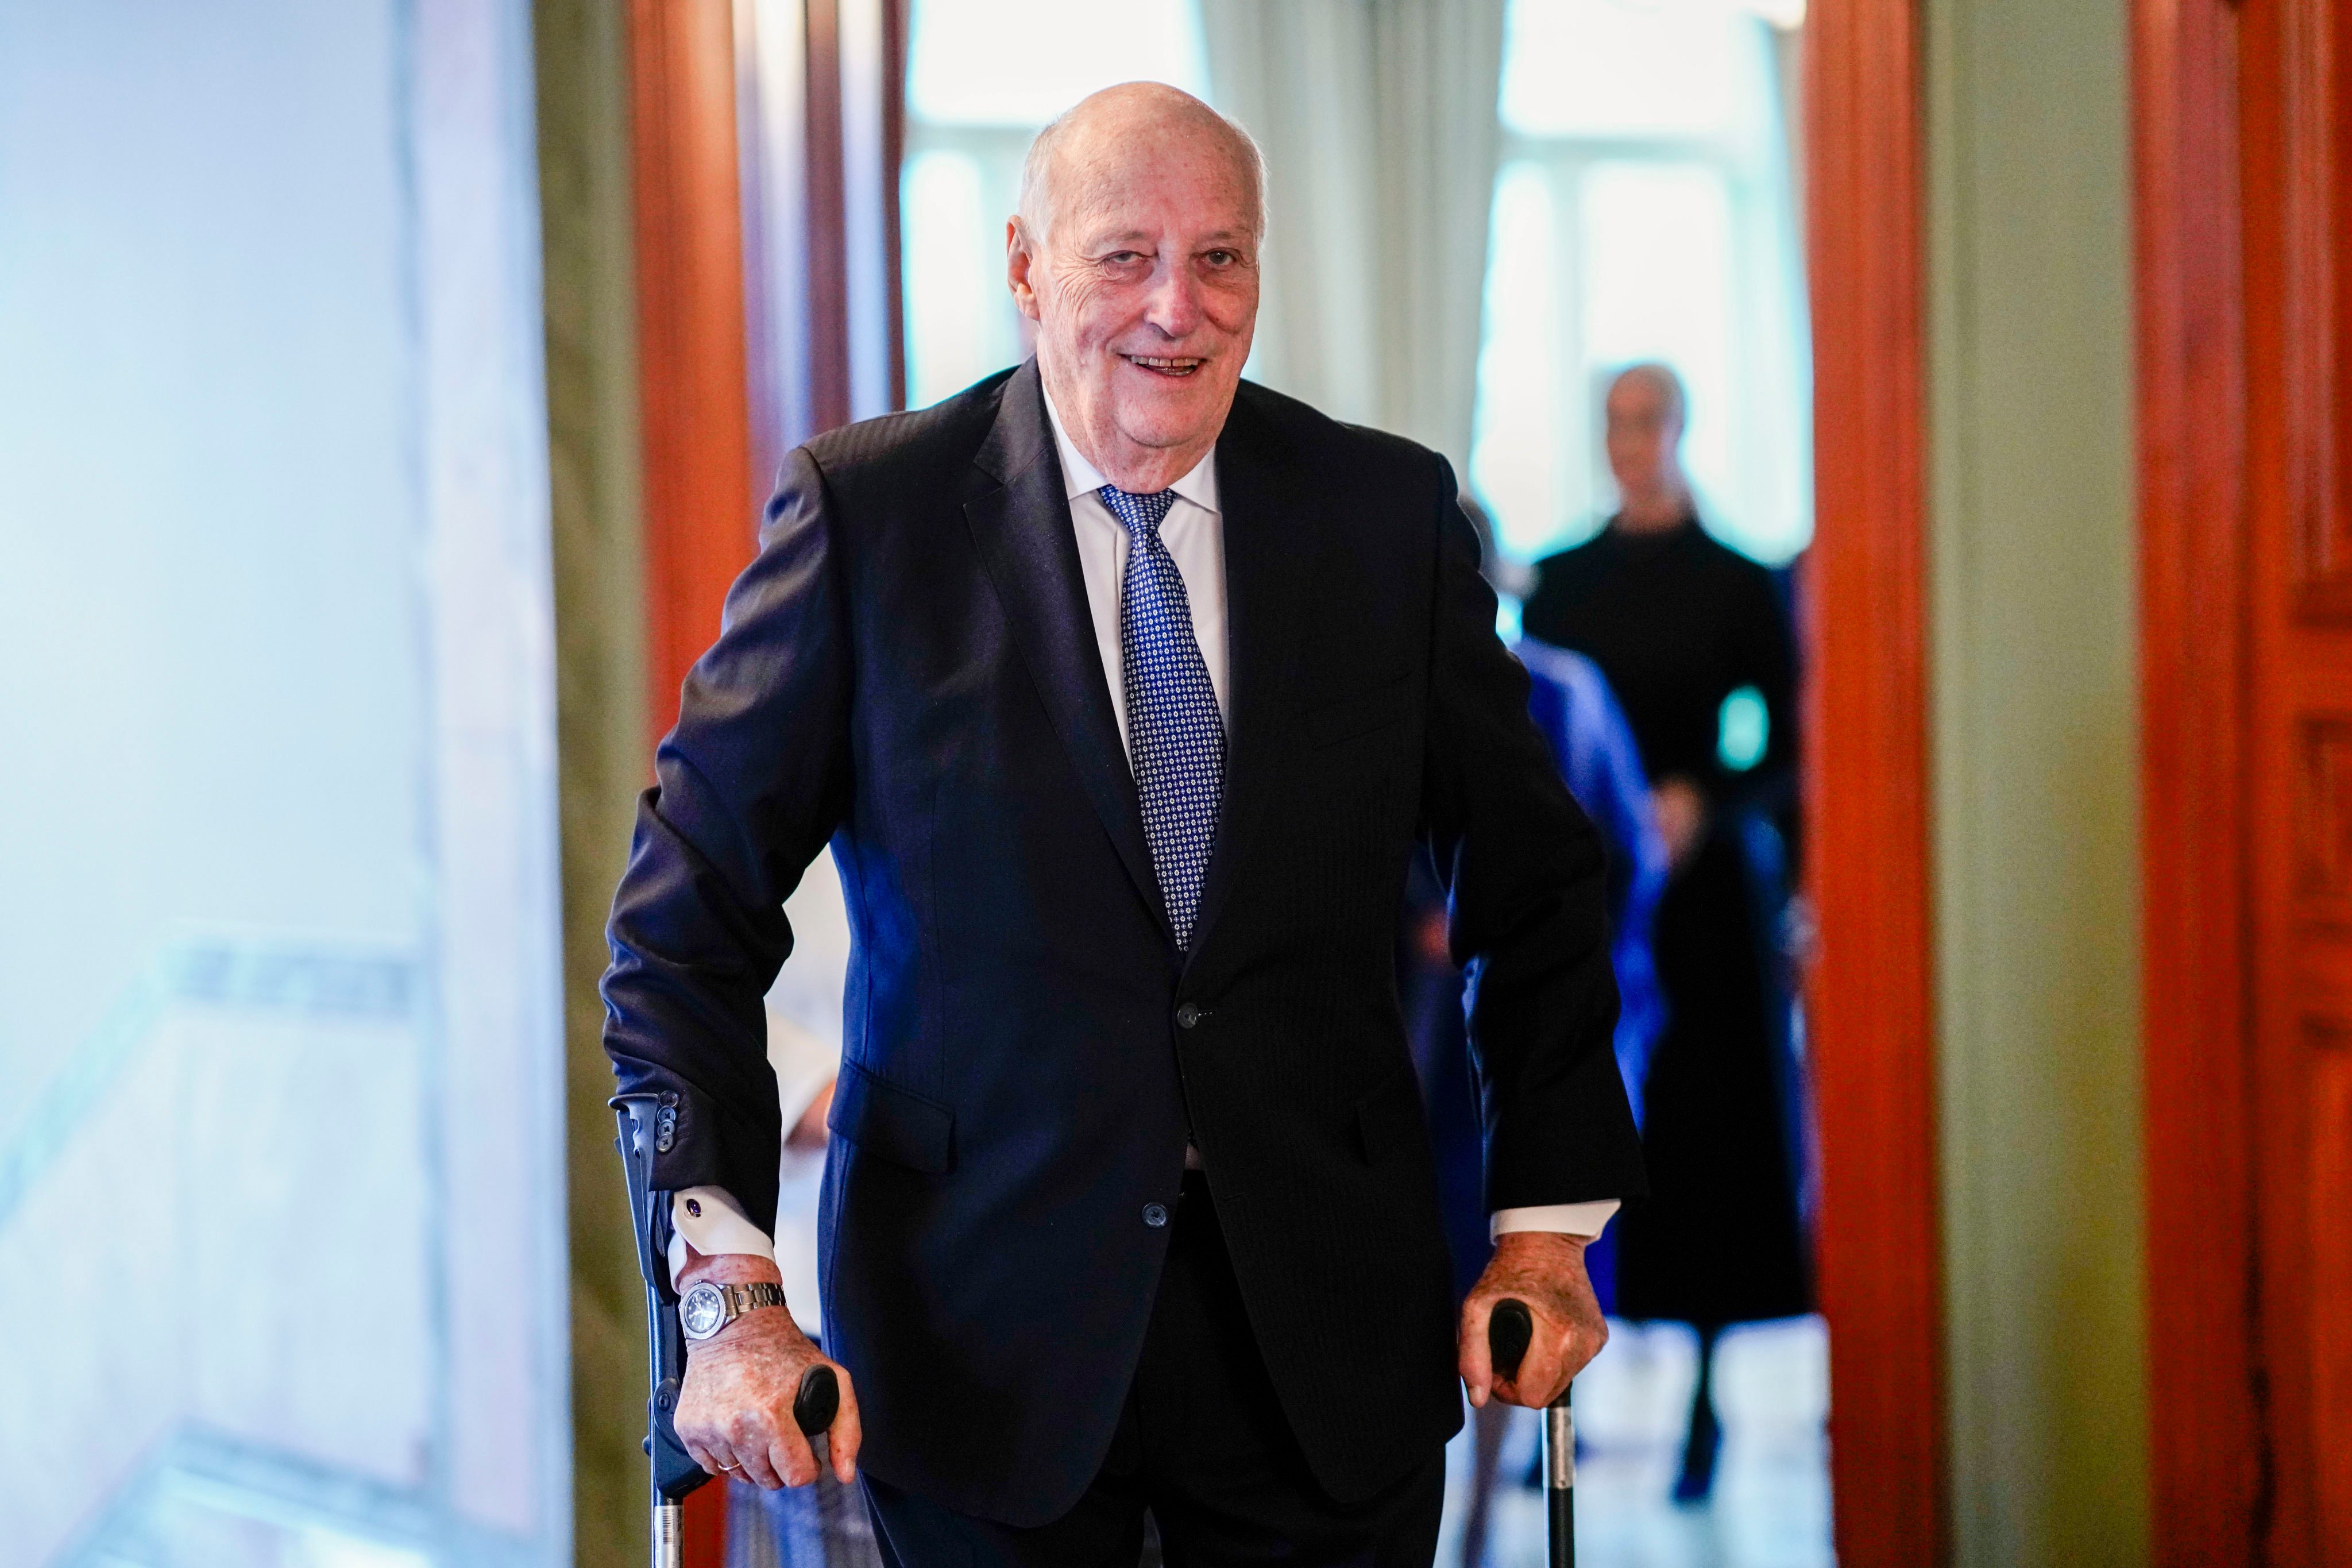 Norway’s King Harald has repeatedly said he has no plans to abdicate. Photo: AP